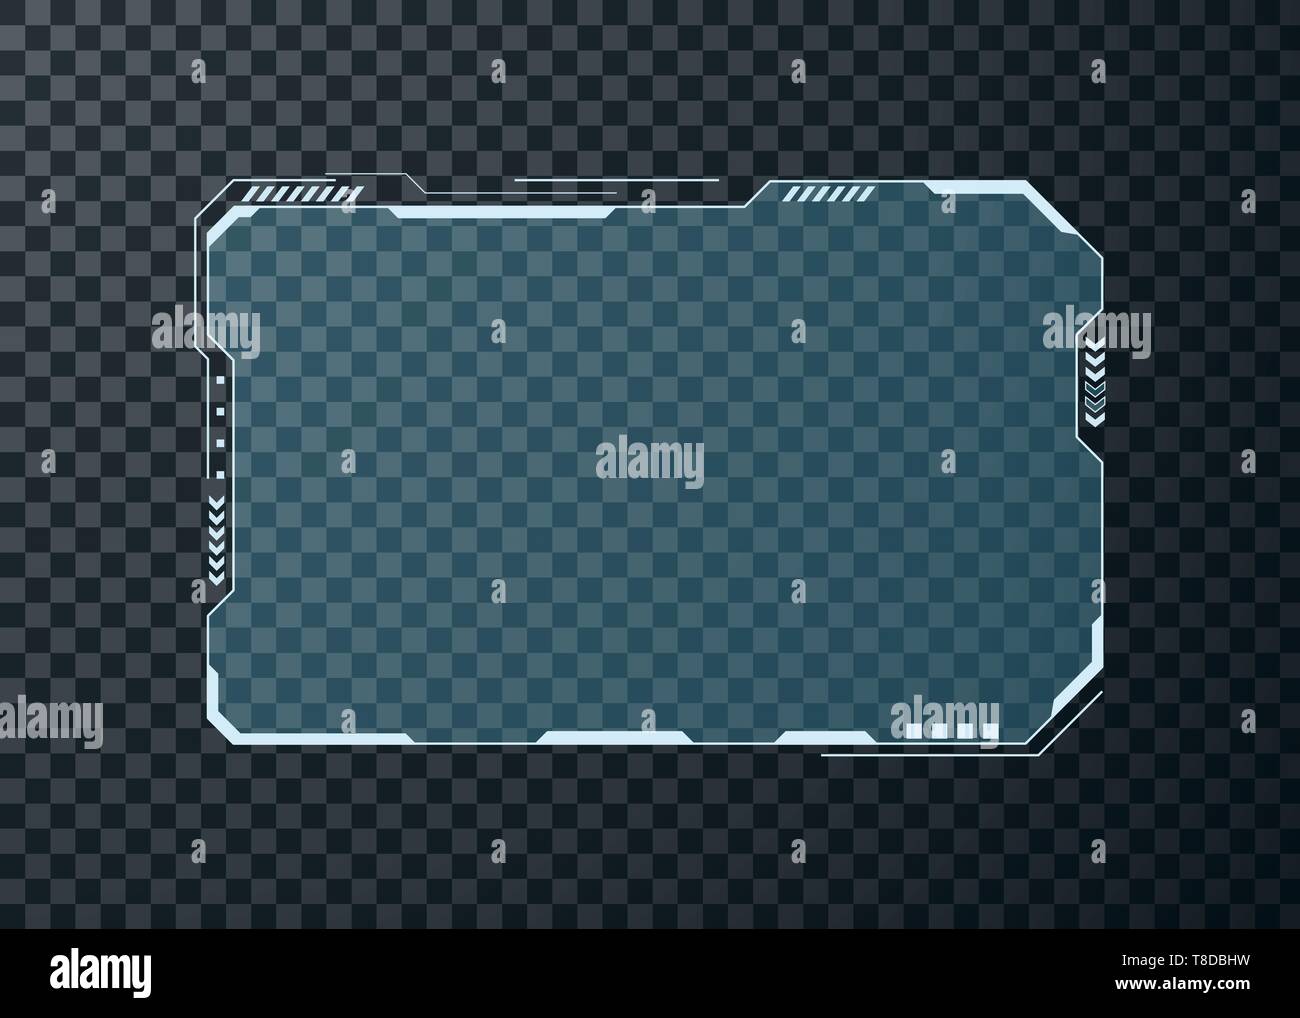 HUD futuristic user interface screen element. Abstract control panel layout design. Sci fi virtual tech display. Vector illustration isolated on trans Stock Vector